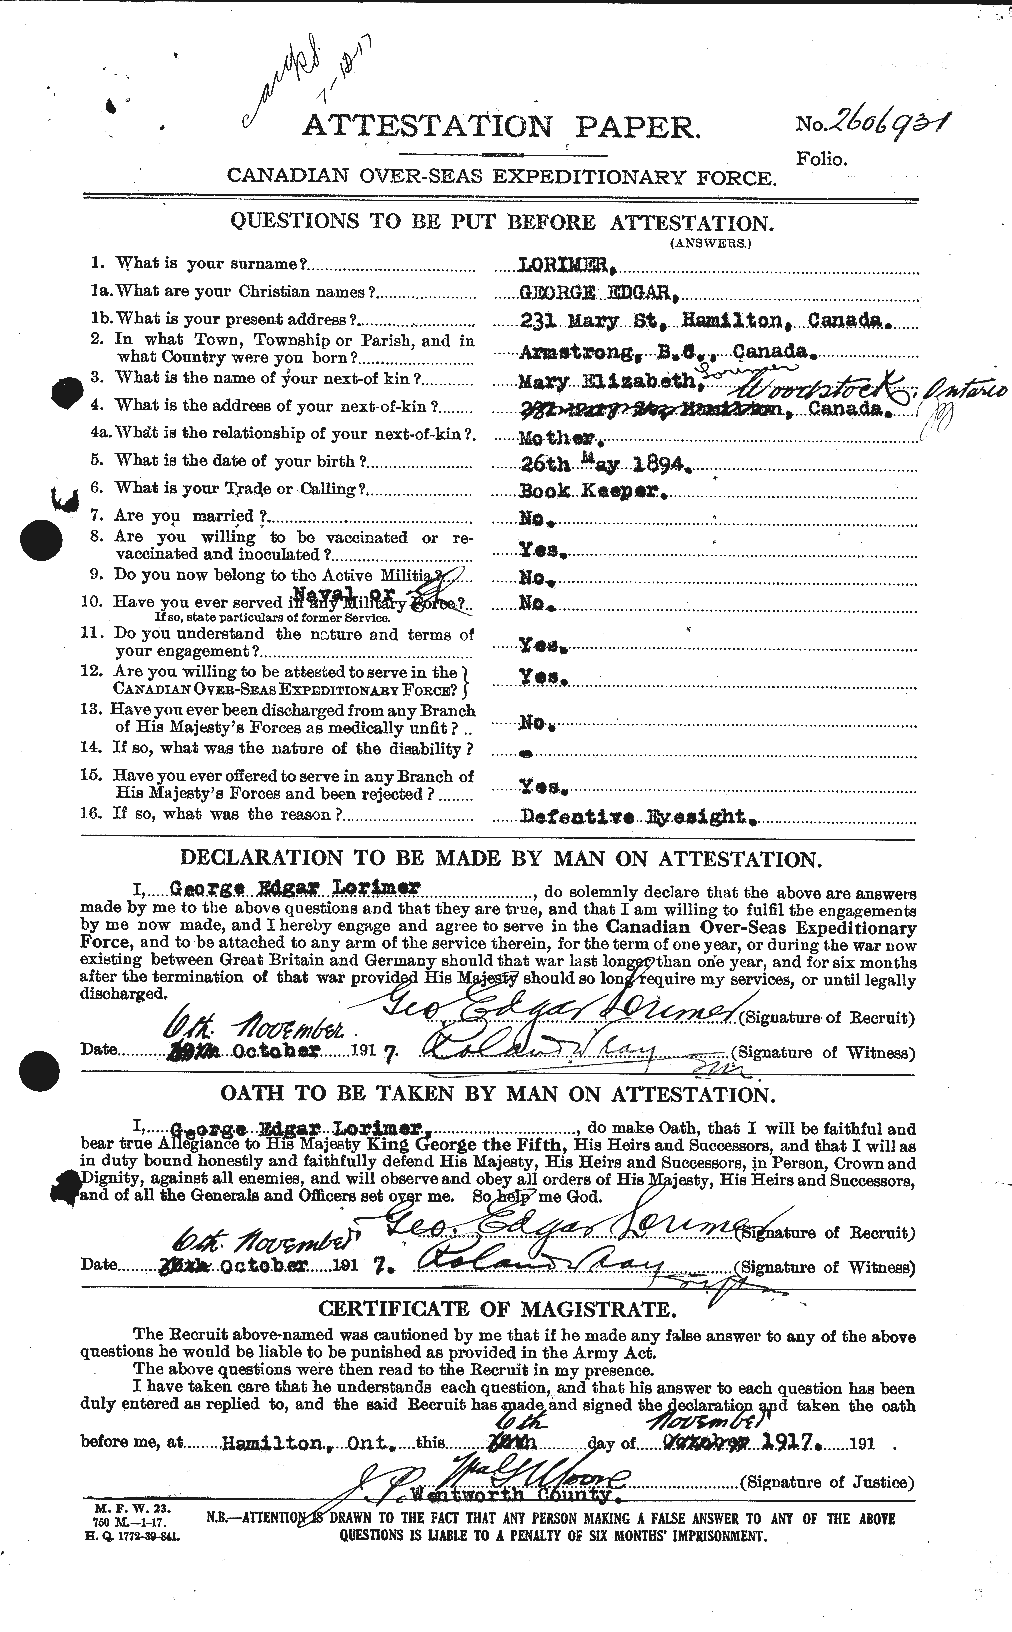 Personnel Records of the First World War - CEF 473935a